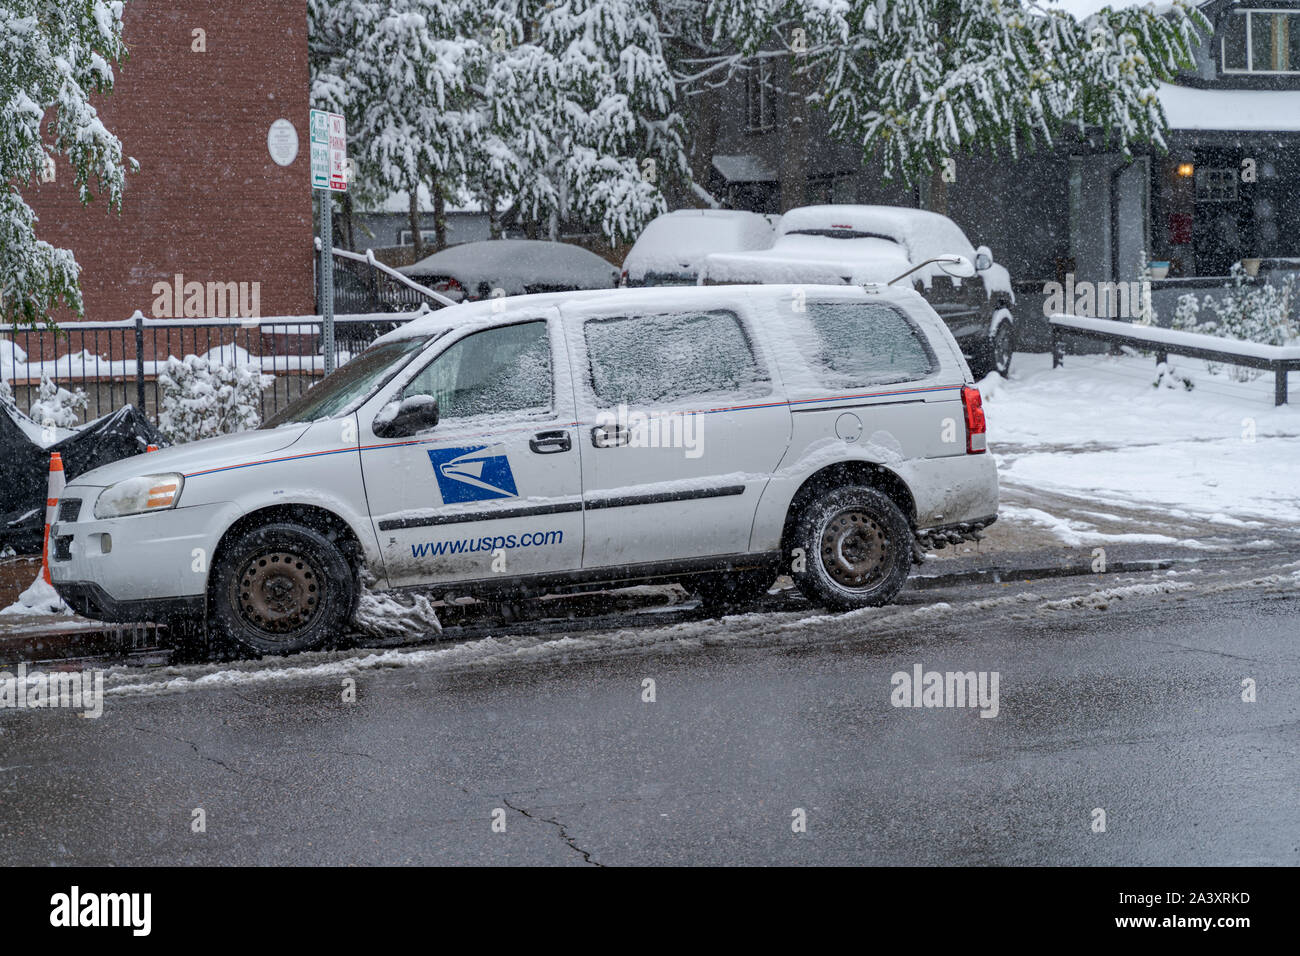 Denver, Colorado, USA- October 10, 2019: USPS delivery vehicle during Denver's first snow storm of the season. Stock Photo